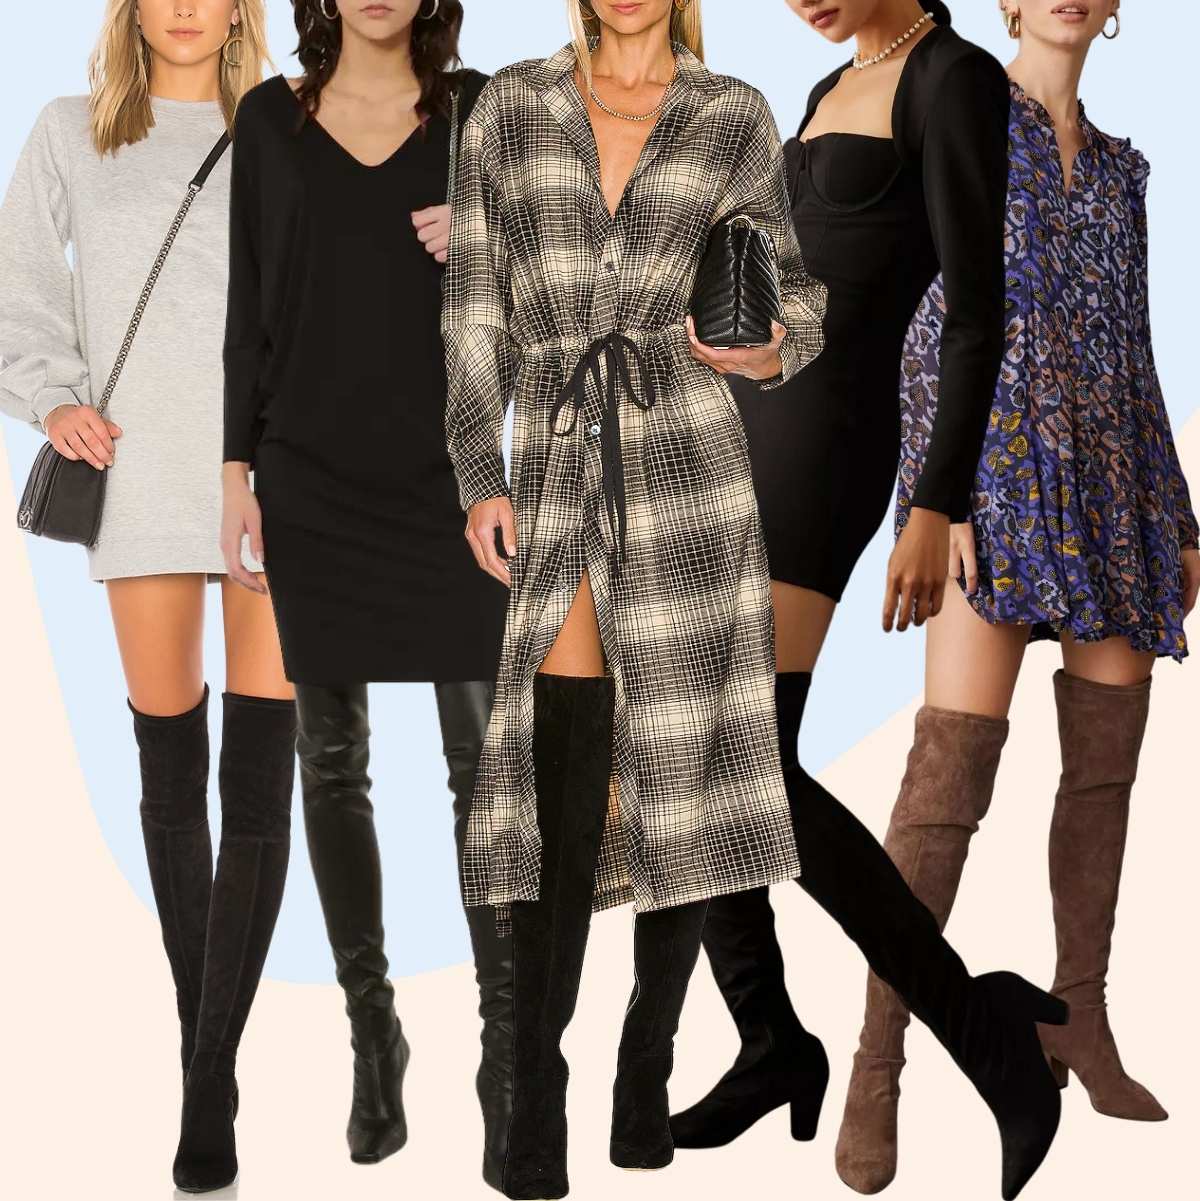 Collage of 5 women wearing different over the knee boots with dresses.